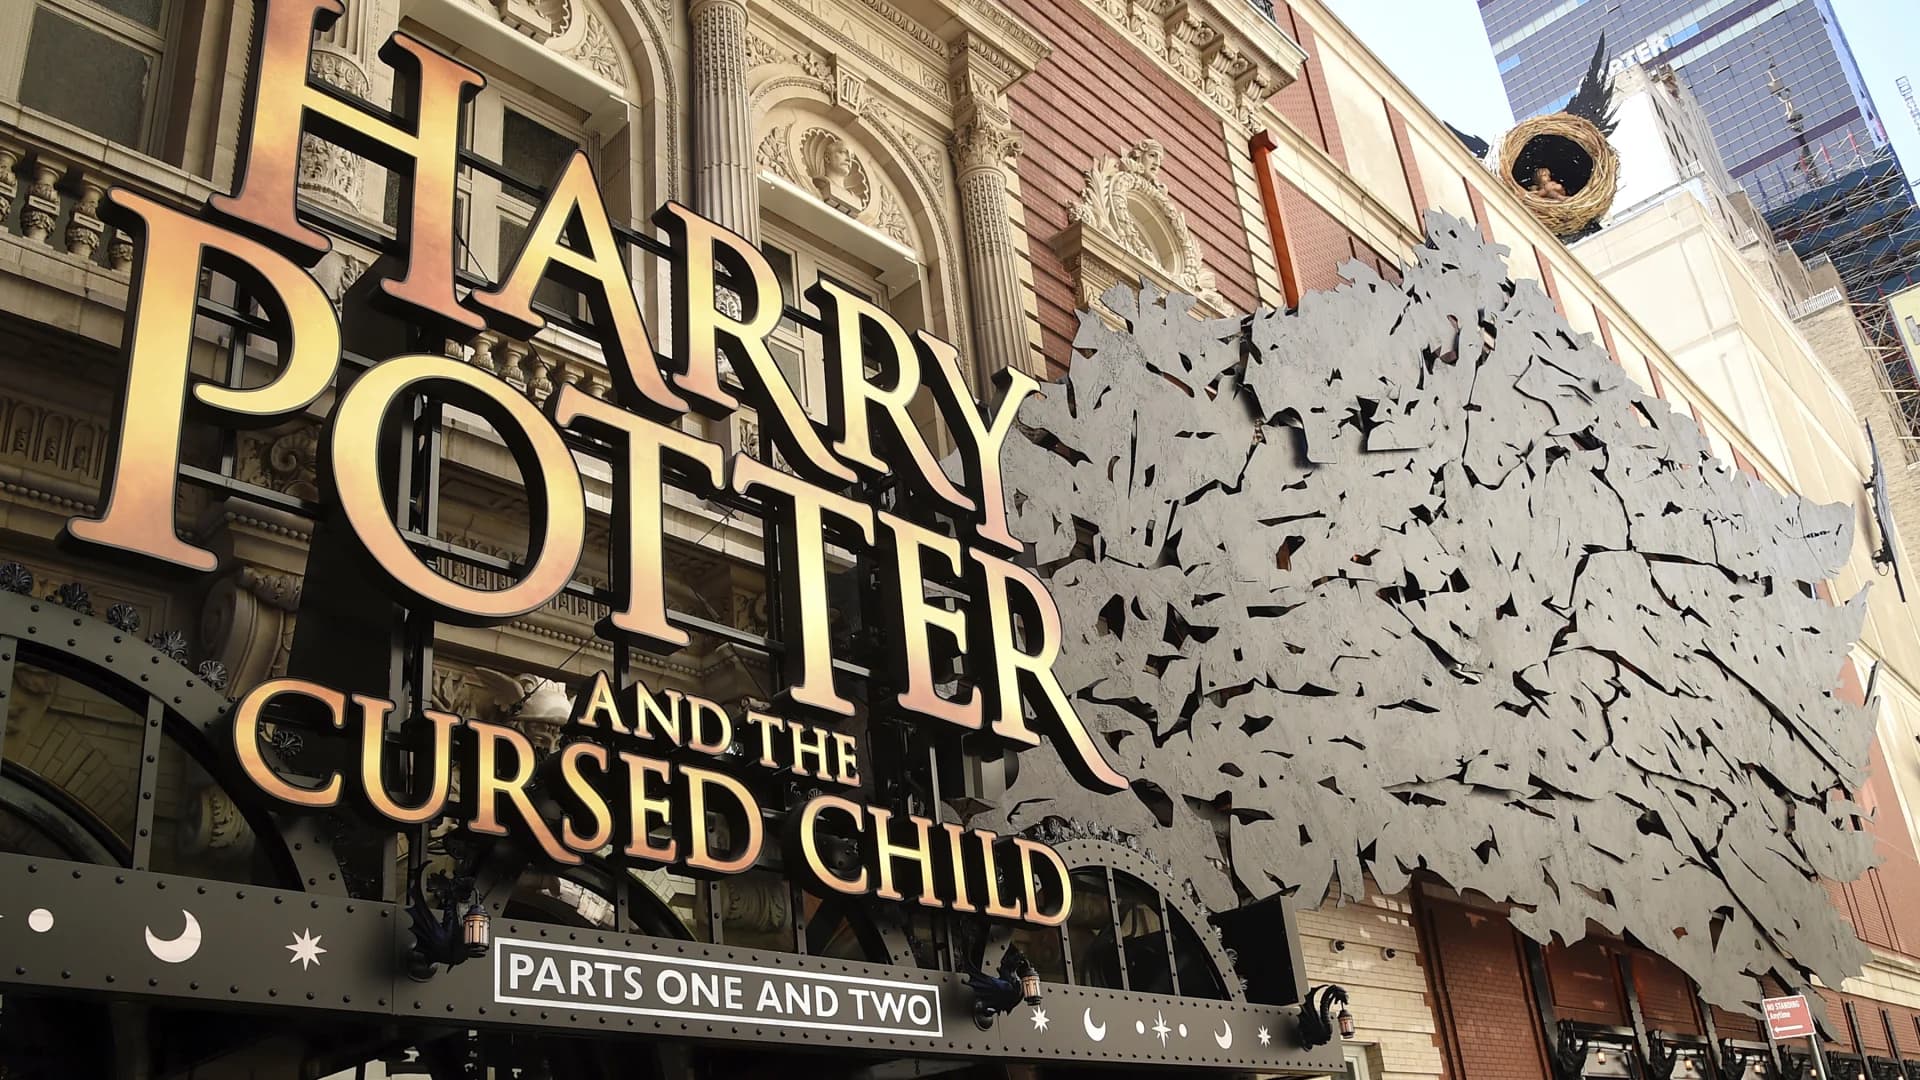 'Harry Potter and the Cursed Child' reopens on Broadway today